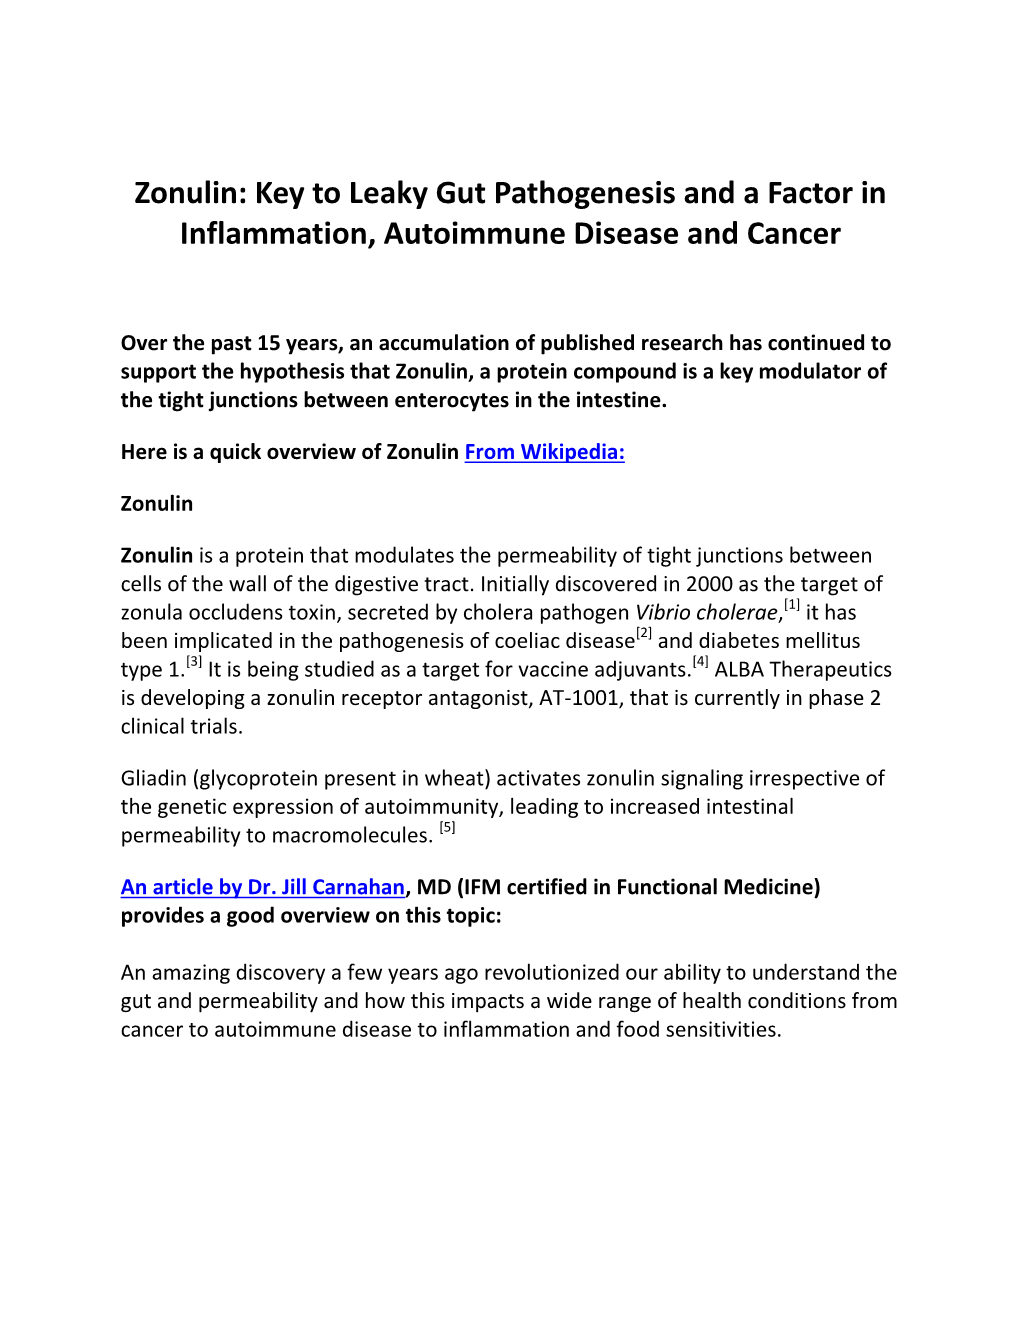 Zonulin: Key to Leaky Gut Pathogenesis and a Factor in Inflammation, Autoimmune Disease and Cancer